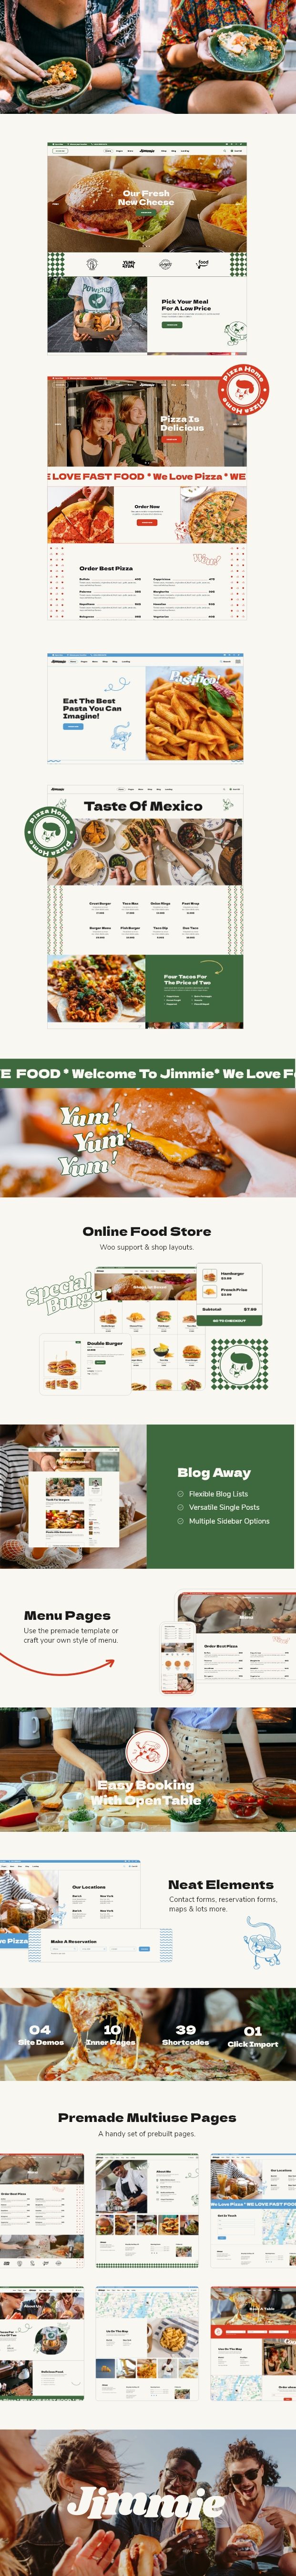 Jimmie - Fast Food Delivery and Restaurant Theme - 3